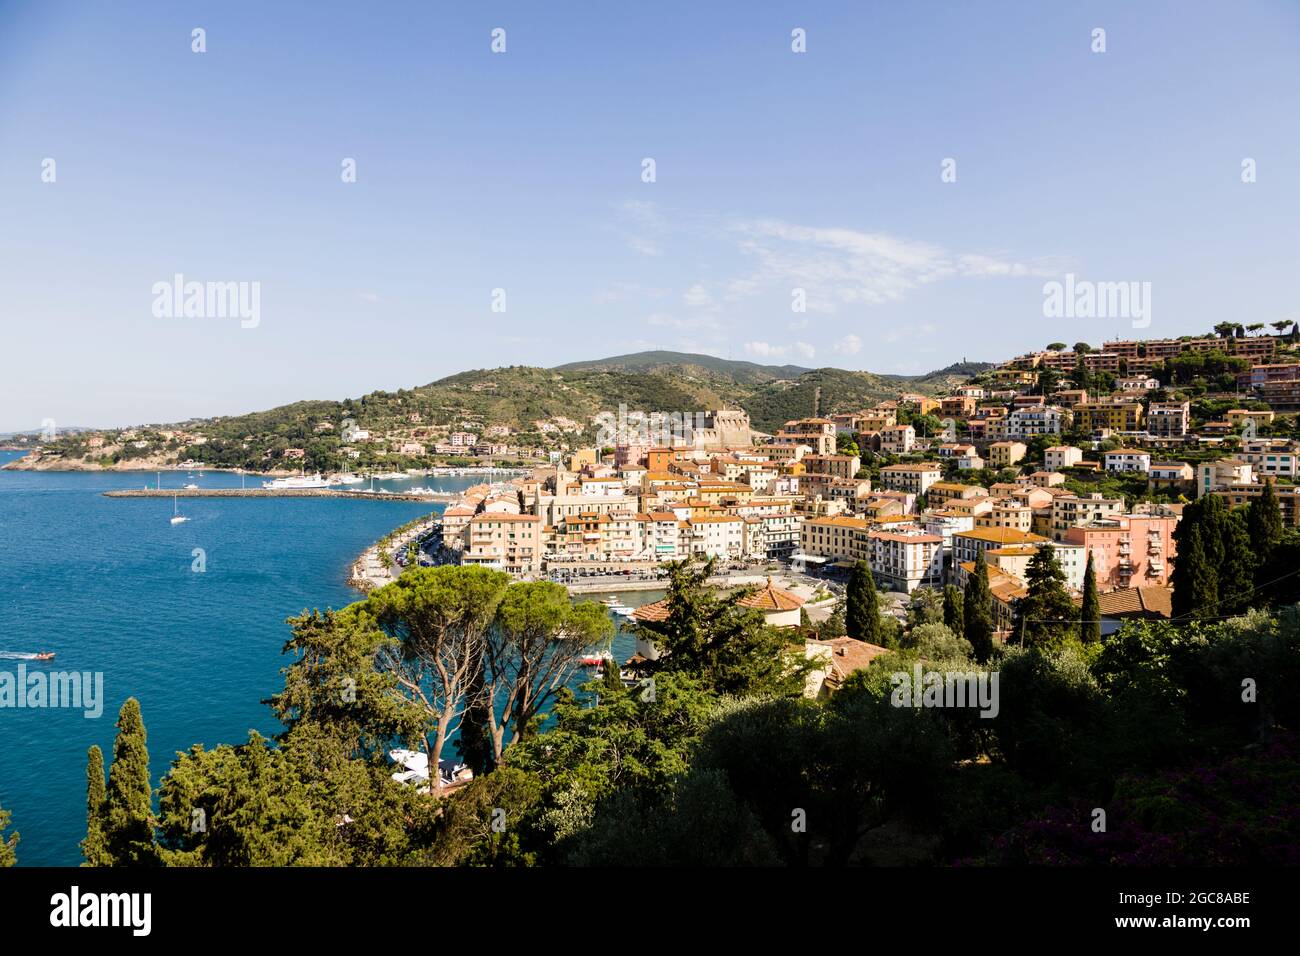 Houses overlooking the harbour in Porto Santo Stefano, one of the two main harbours on the side of Monte Argentario, in Tuscany, Italy. Stock Photo